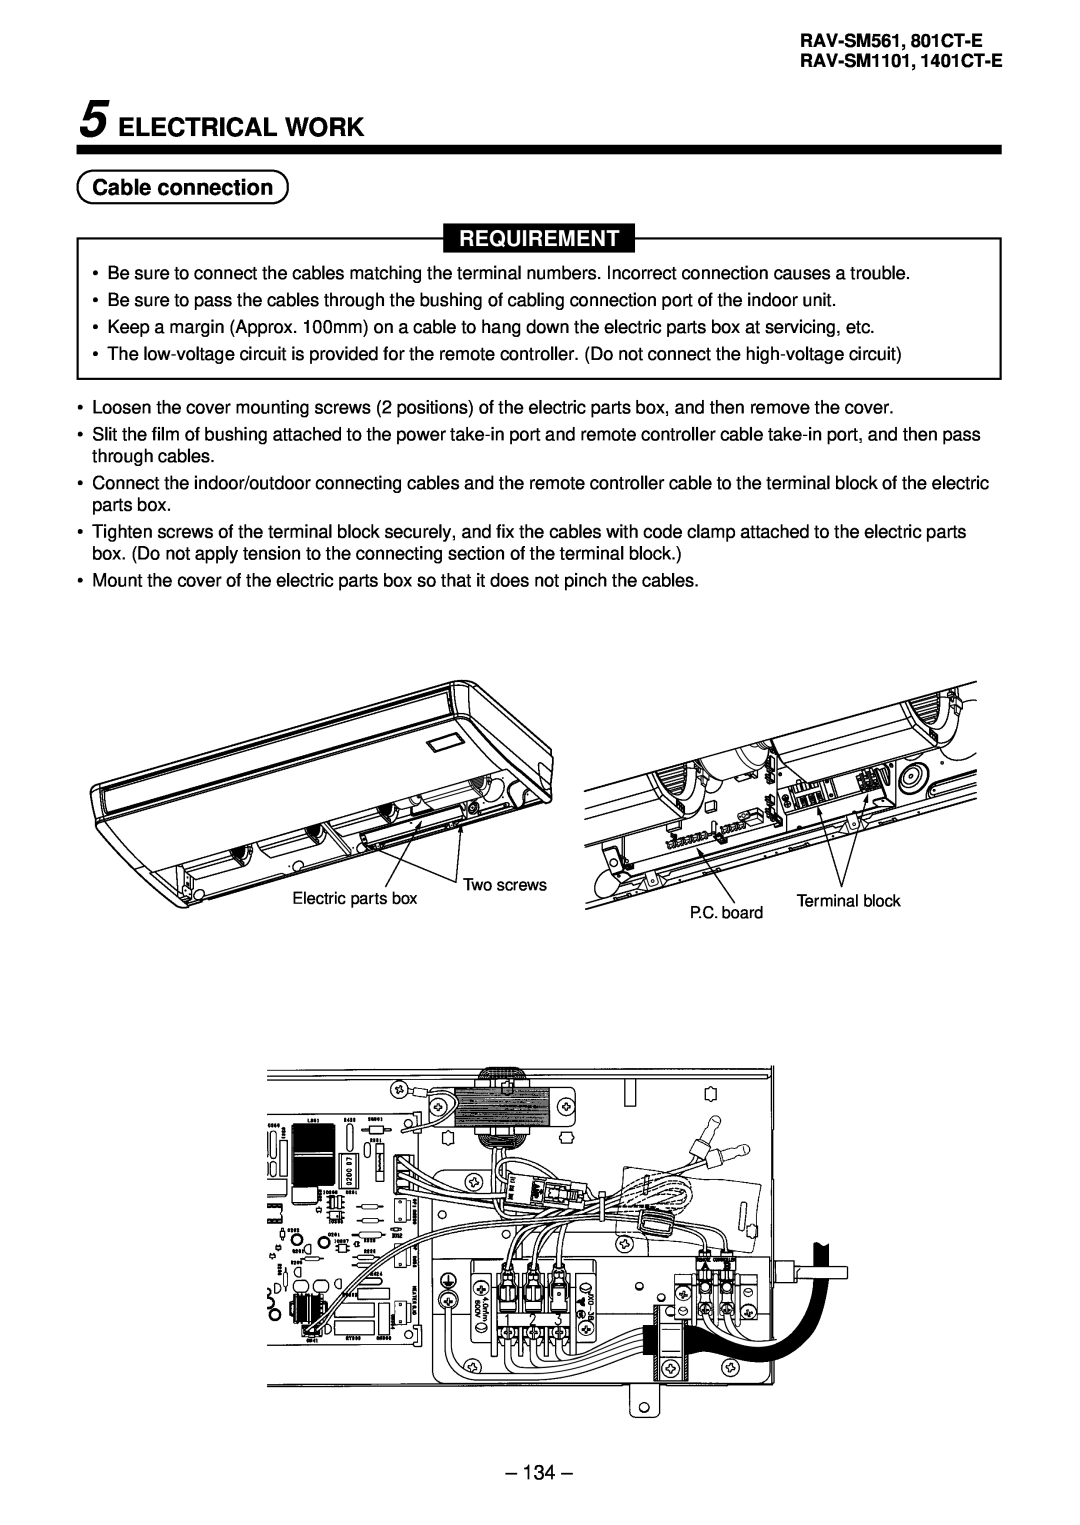 Balcar R410A service manual Electrical Work, Cable connection, Requirement, 134 